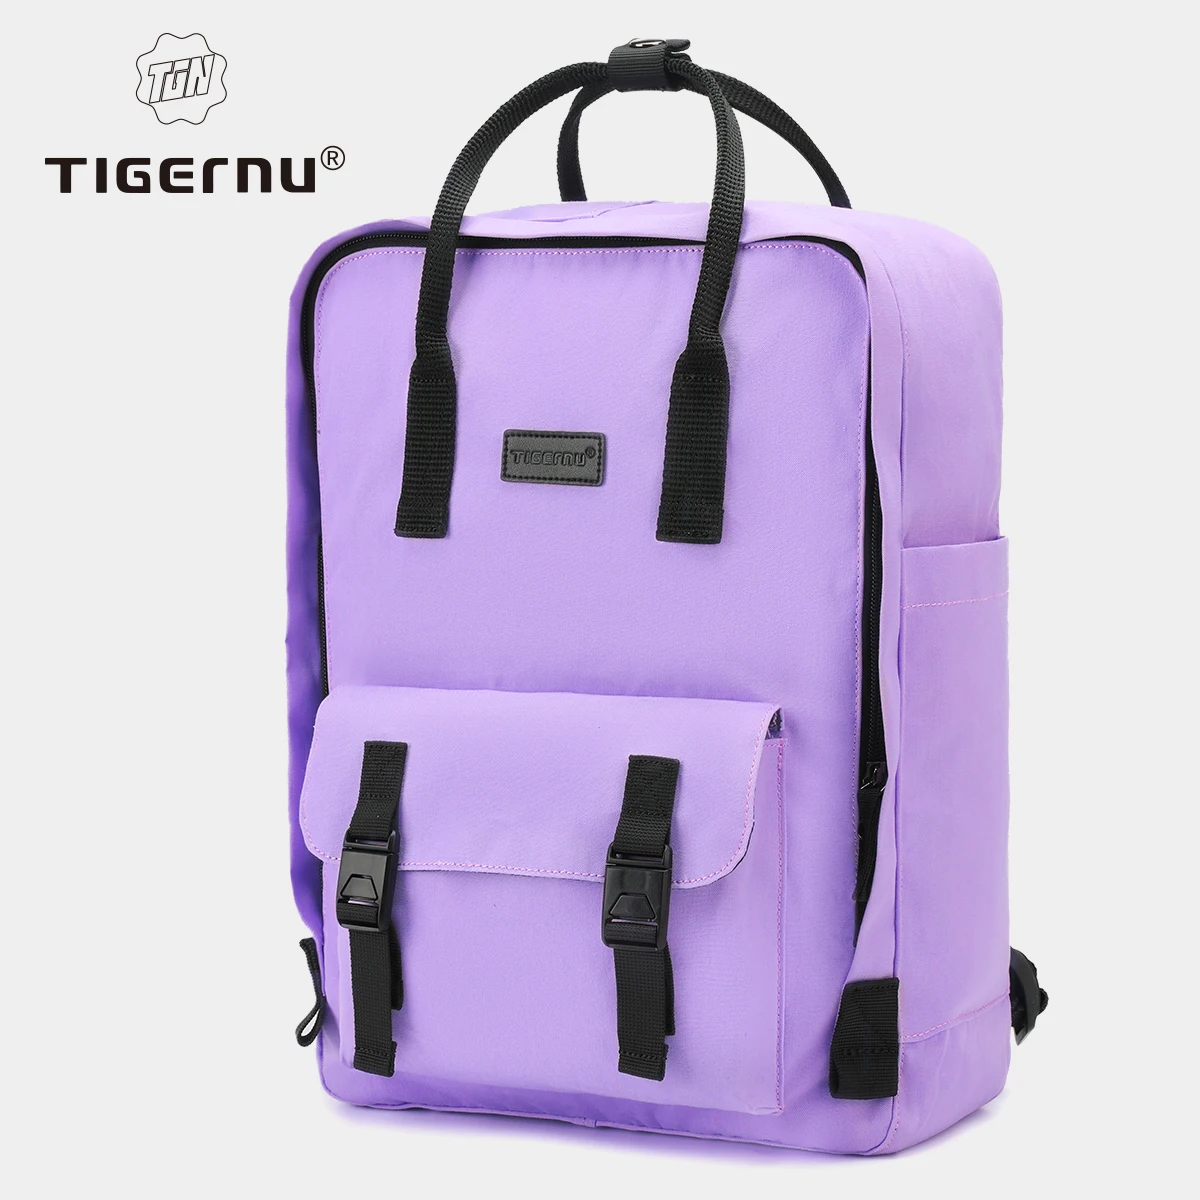 Tigernu Light Weight Colorful Casual Women Backpack Urban Female Bags Canvas Leisure Gril School Backpack Bag For Teenagers 2022